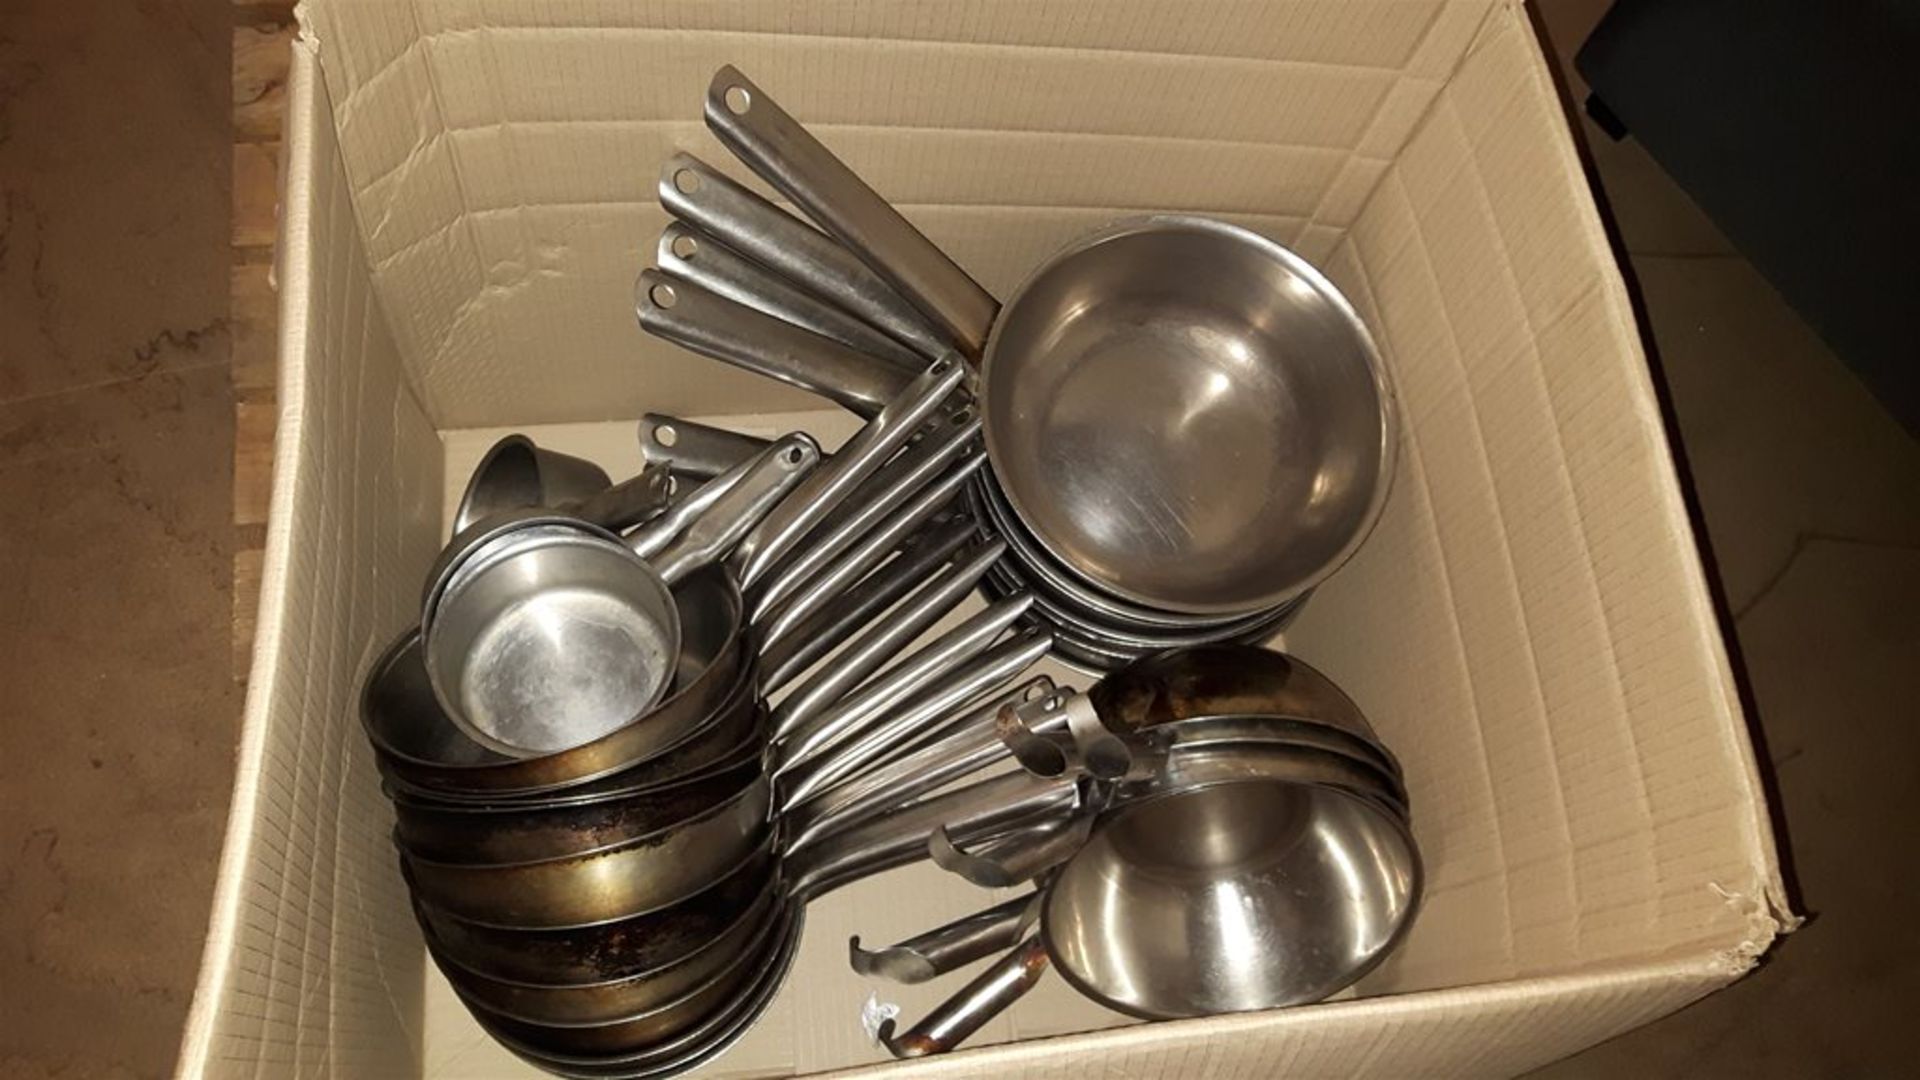 Job lot of 23 chefs saucepans in various sizes.